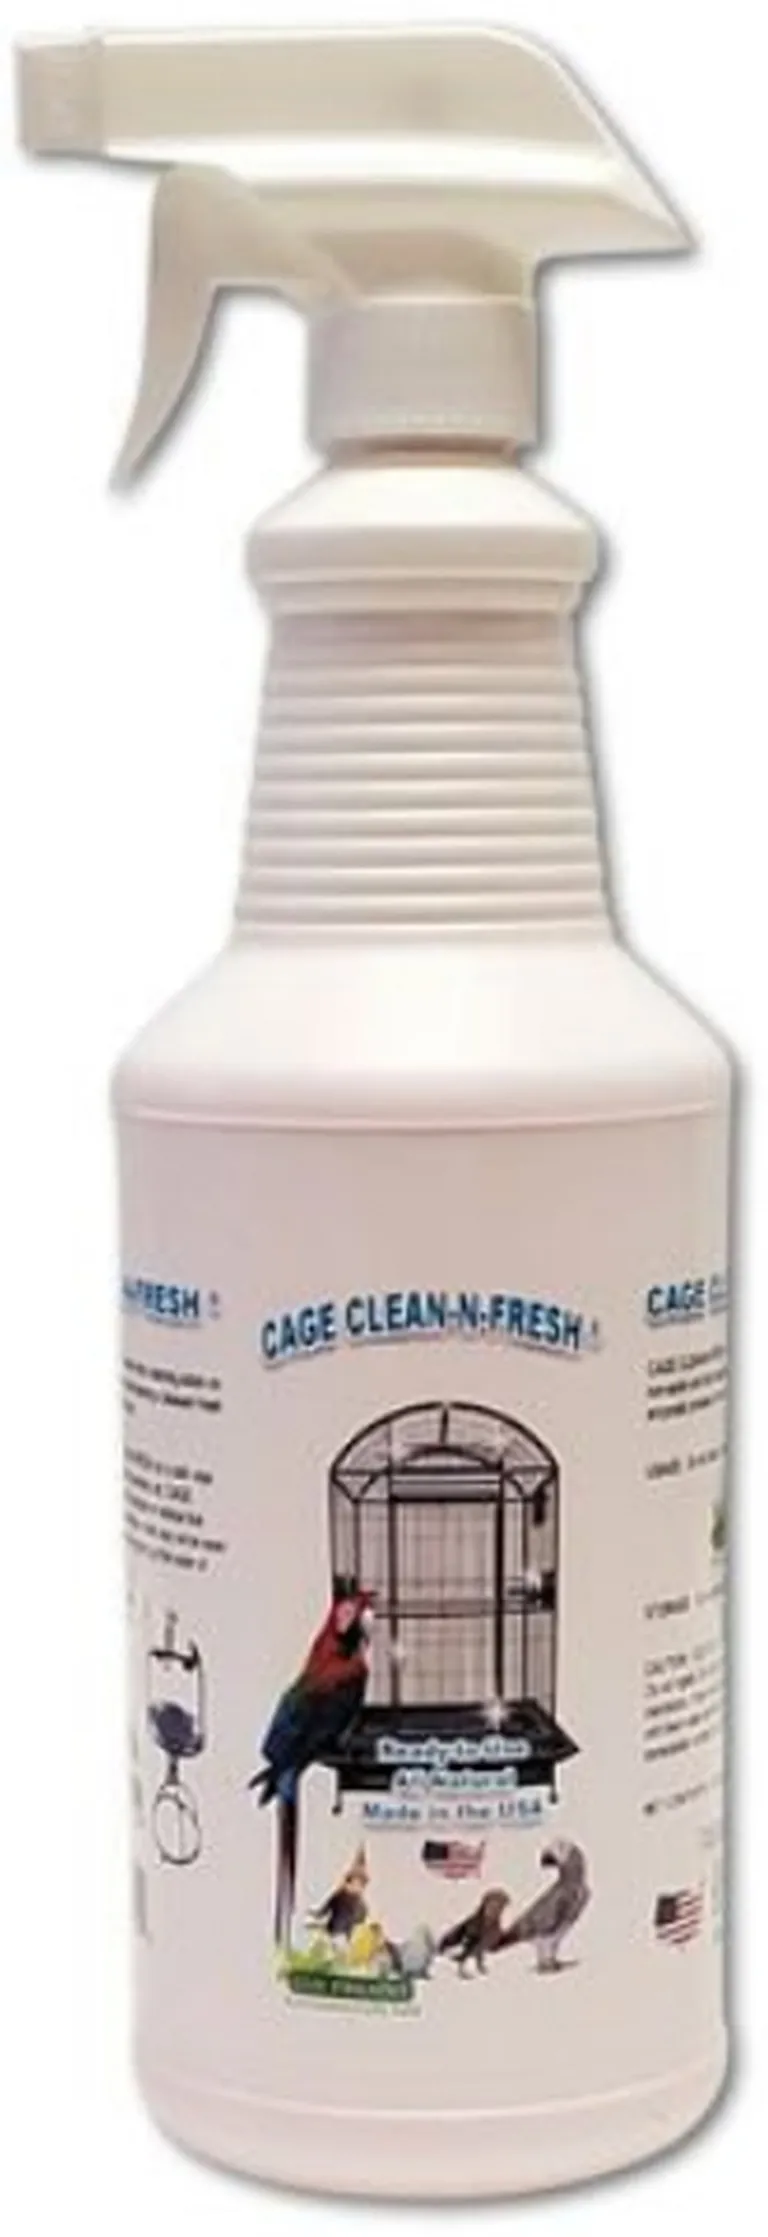 AE Cage Company Cage Clean n Fresh Cage Cleaner Fresh Peppermint Scent Photo 1